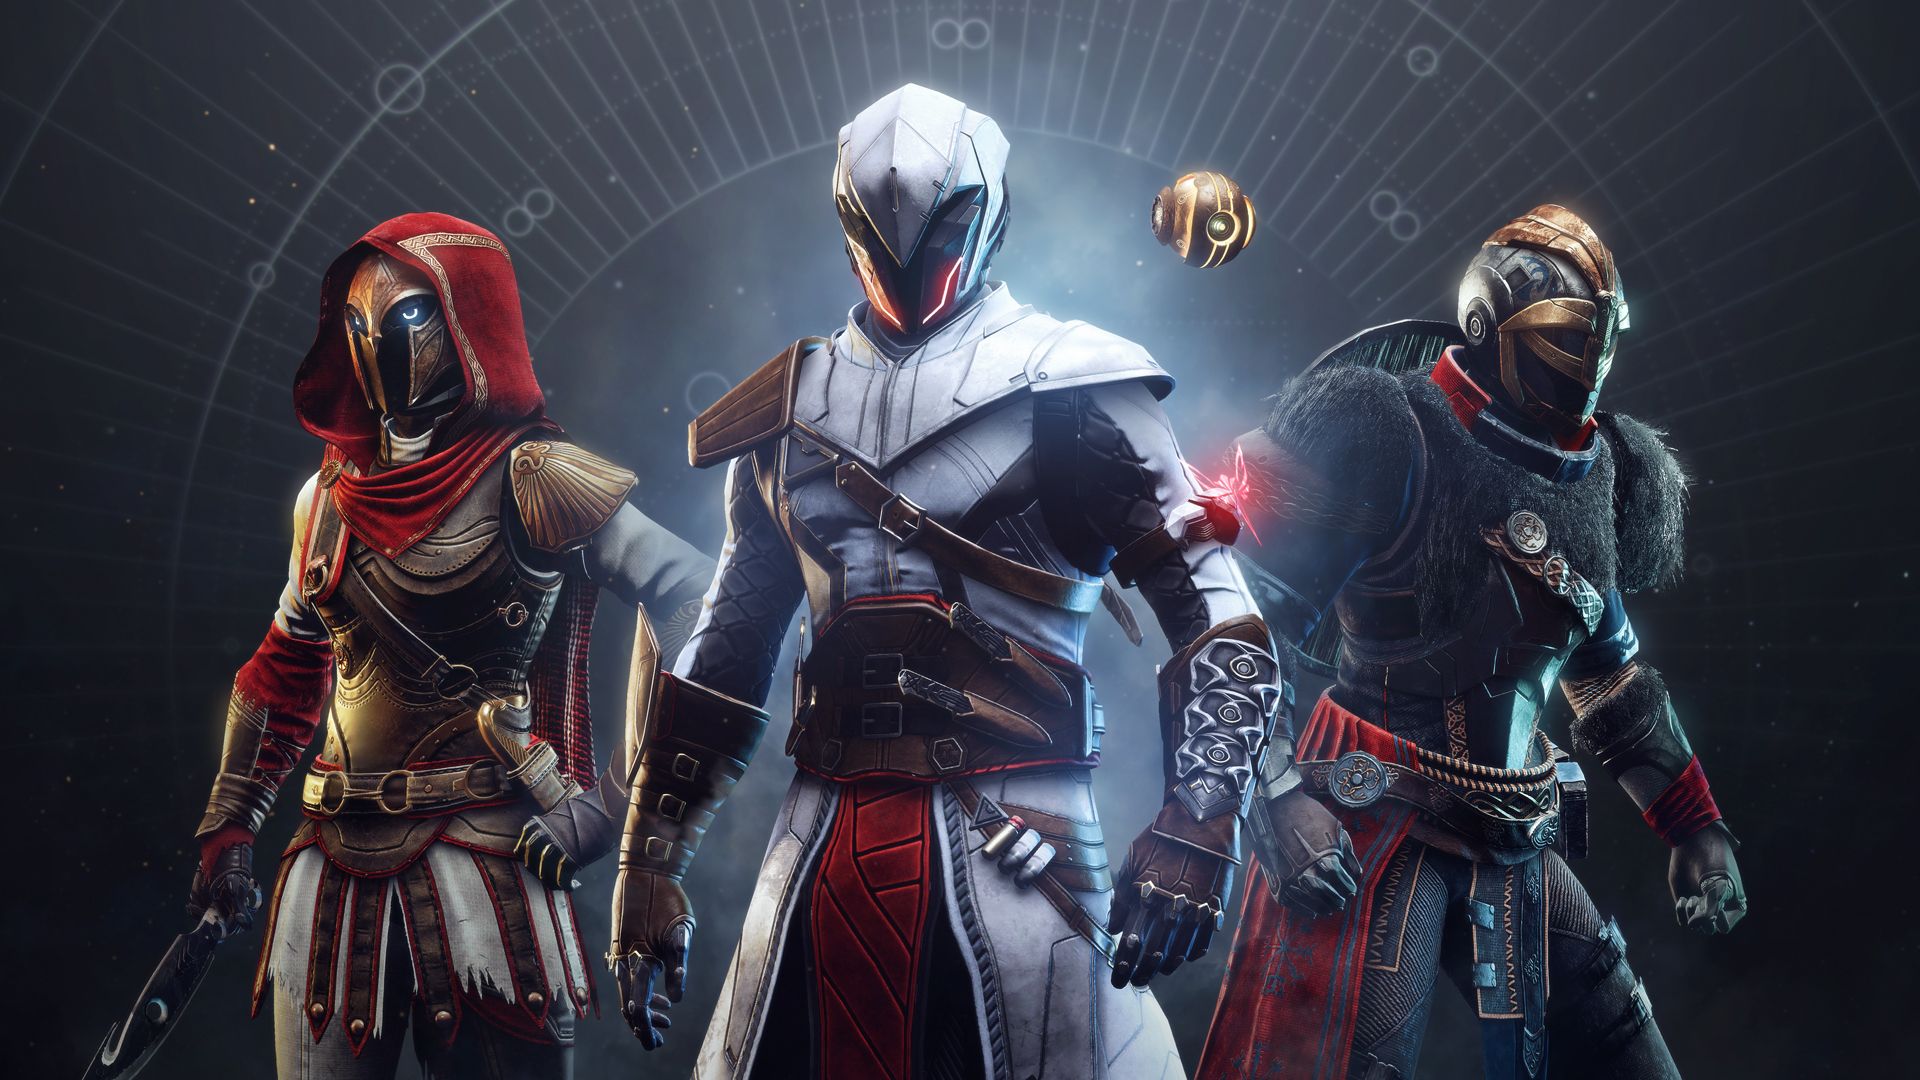 Assassin's Creed Valhalla - Destiny 2 Cosmetics Pack is now